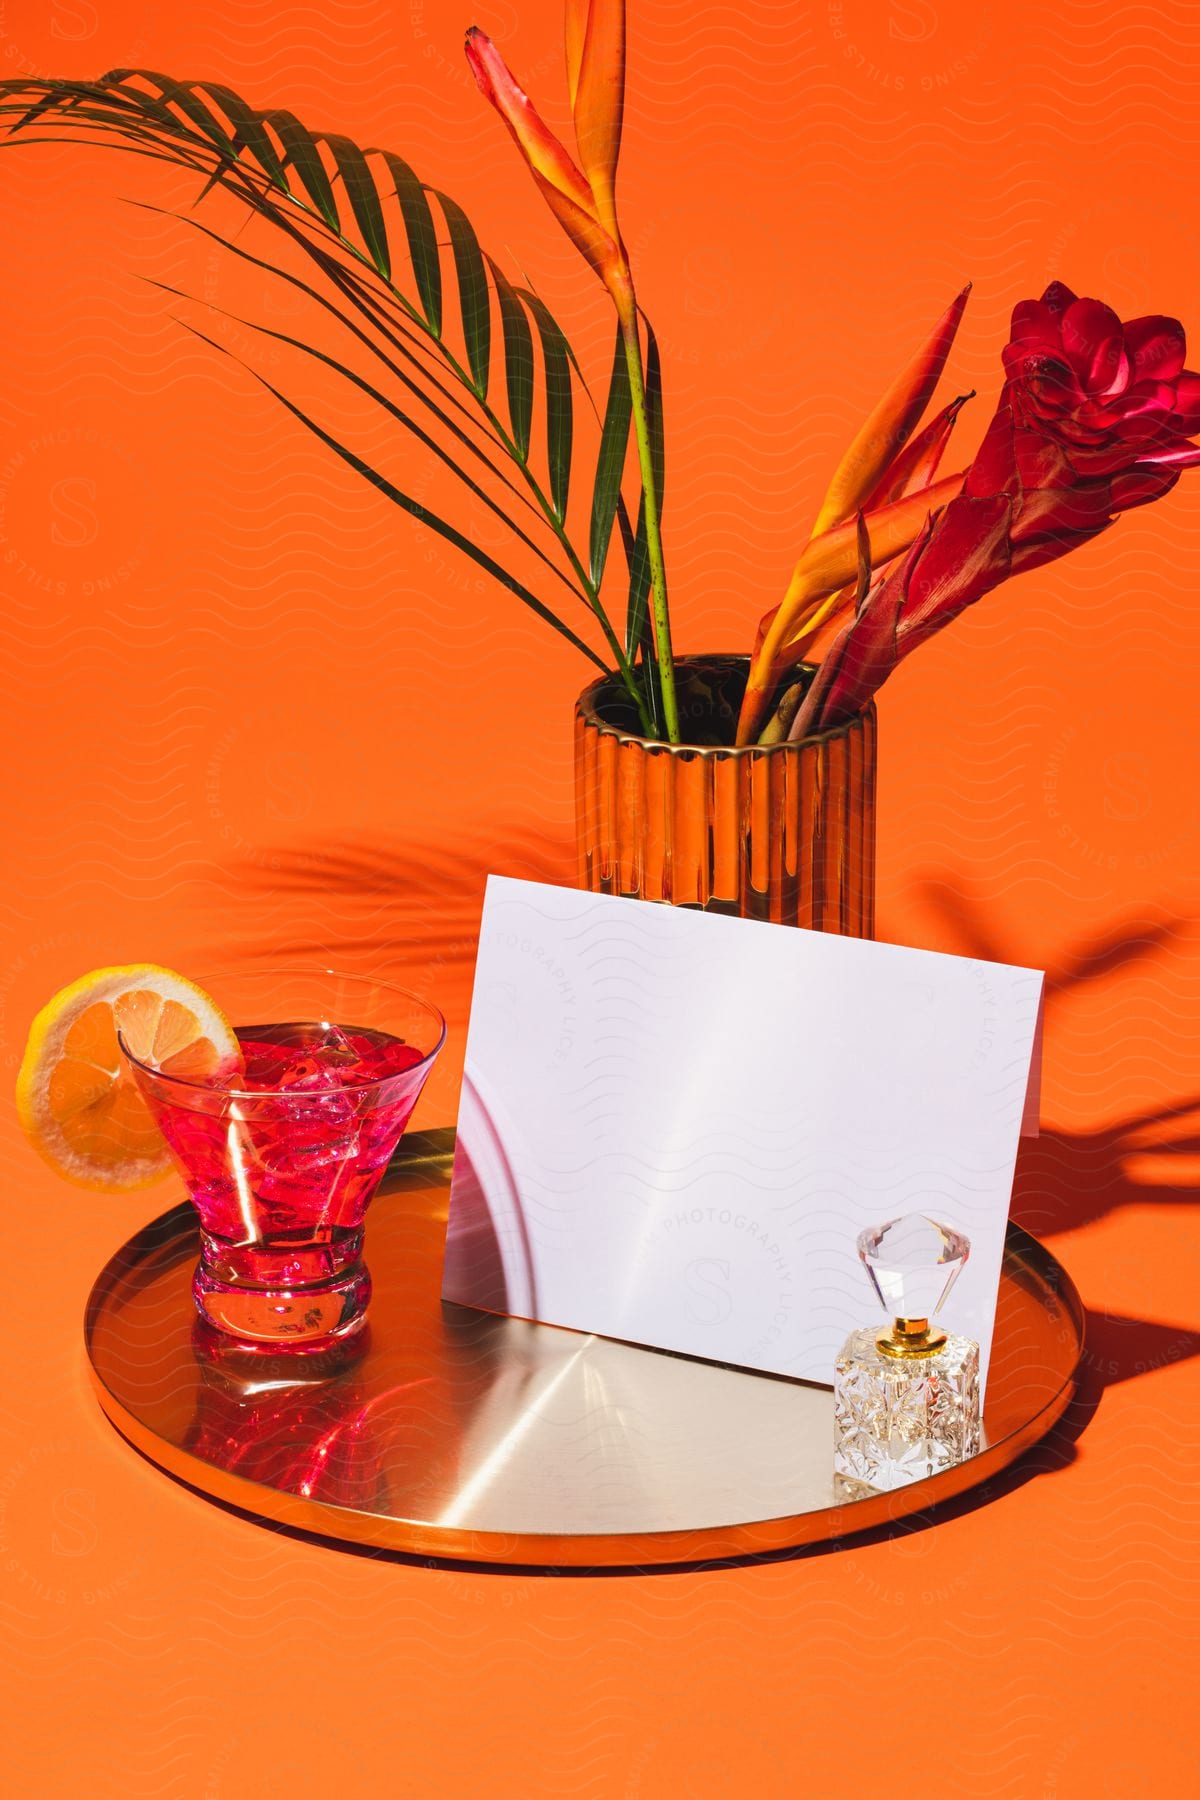 Stock photo of a cocktail served on a glass with a slice of lime and place on a tray next to an envelop and ring case with a flower behind on an orange background